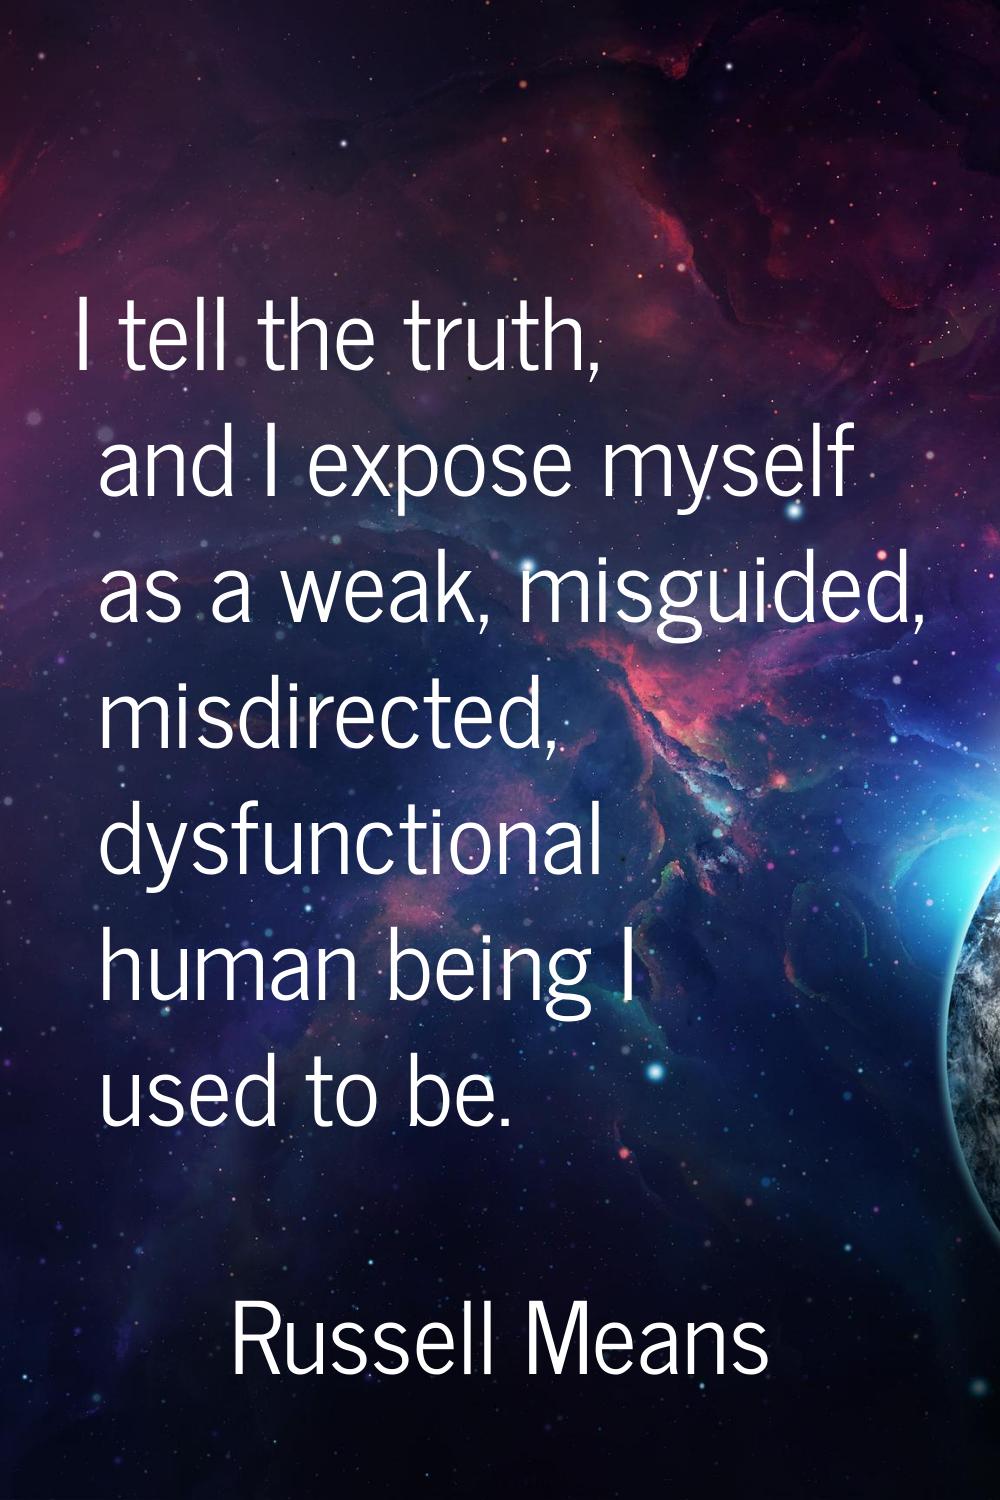 I tell the truth, and I expose myself as a weak, misguided, misdirected, dysfunctional human being 